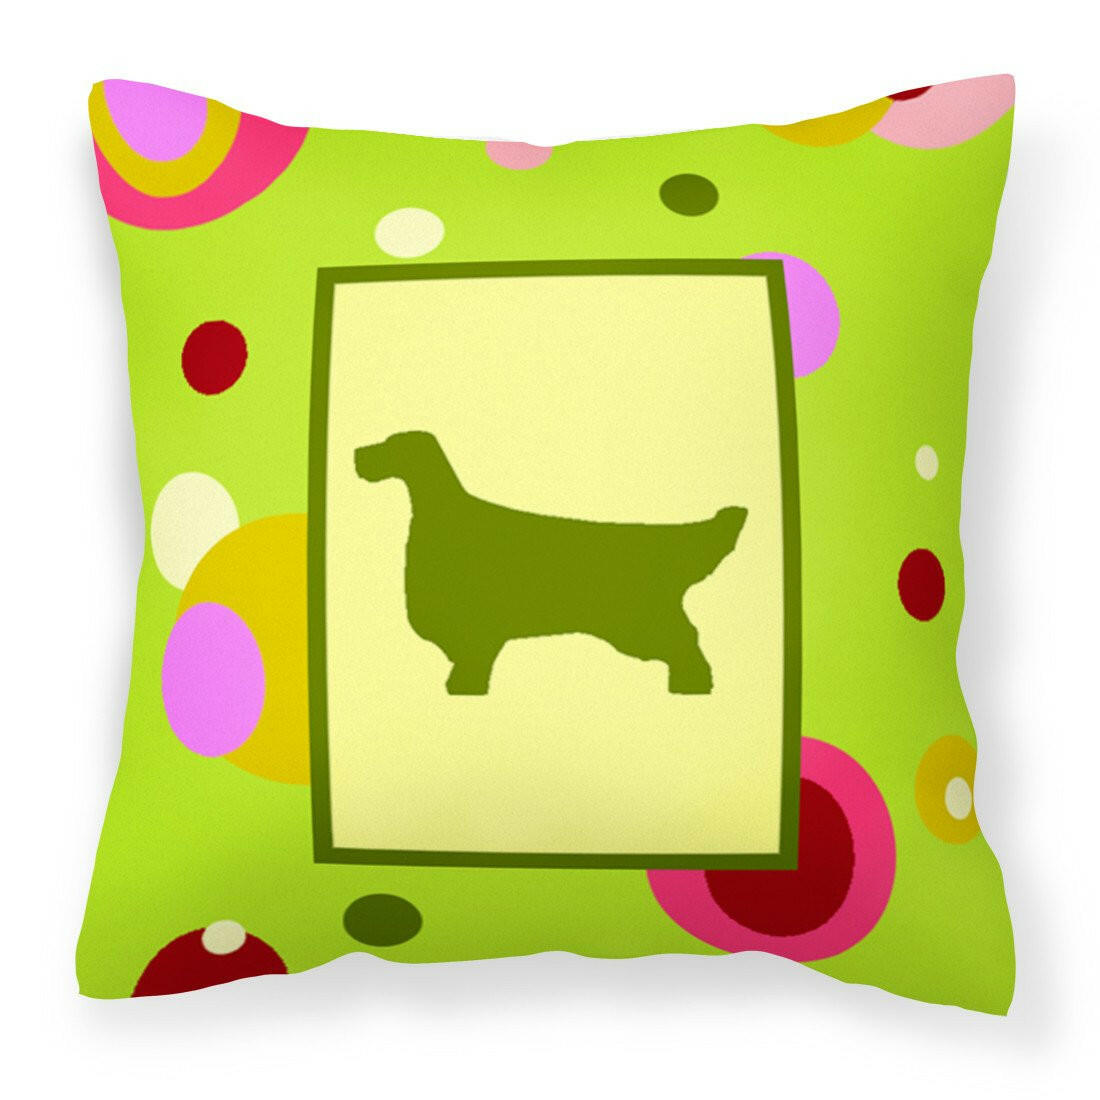 Lime Green Dots English Setter Fabric Decorative Pillow CK1028PW1414 by Caroline's Treasures